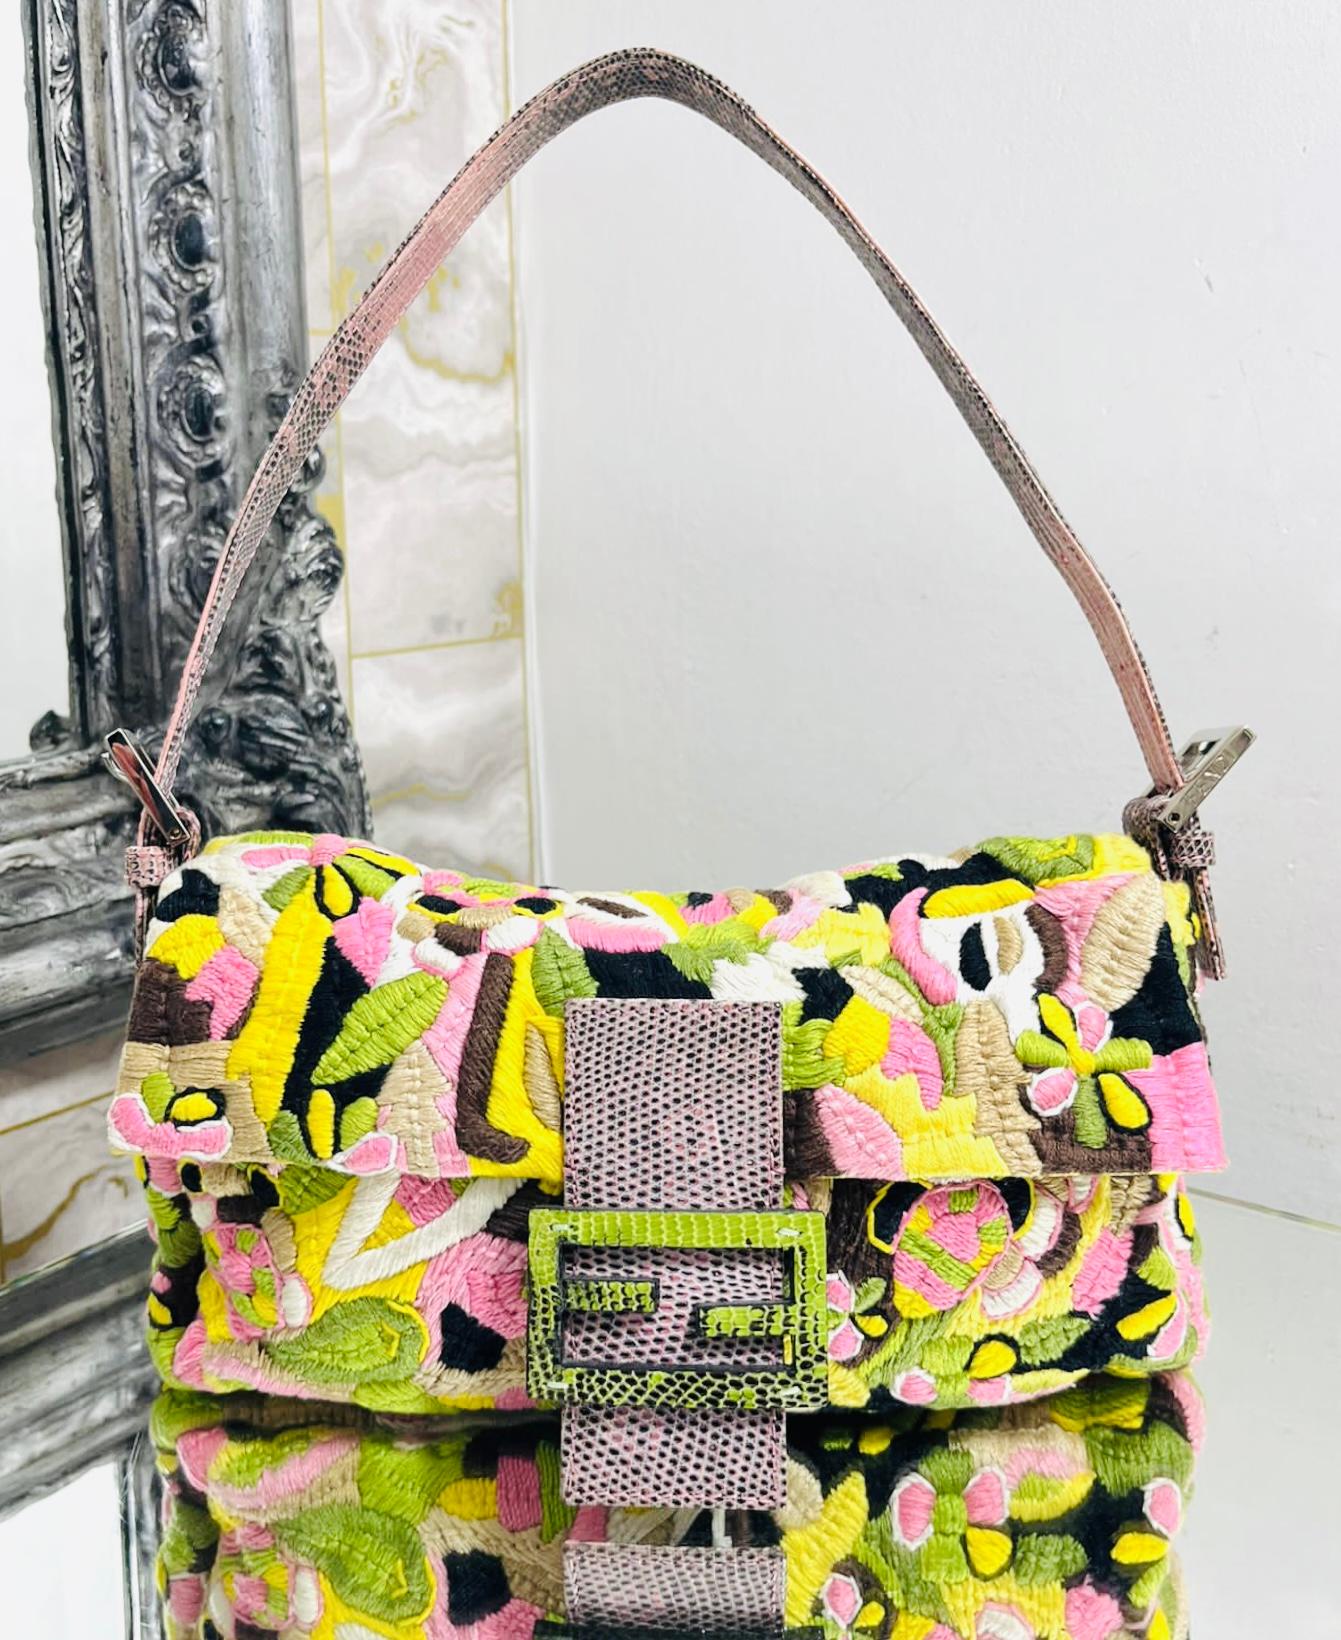 Fendi Embroidered Canvas & Lizard Baguette Bag

Multicoloured shoulder bag designed with abstract/floral embroidery throughout.

Detailed with lizard leather 'FF' logo snap closure and adjustable shoulder strap.

Featuring silver 'Fendi' engraved